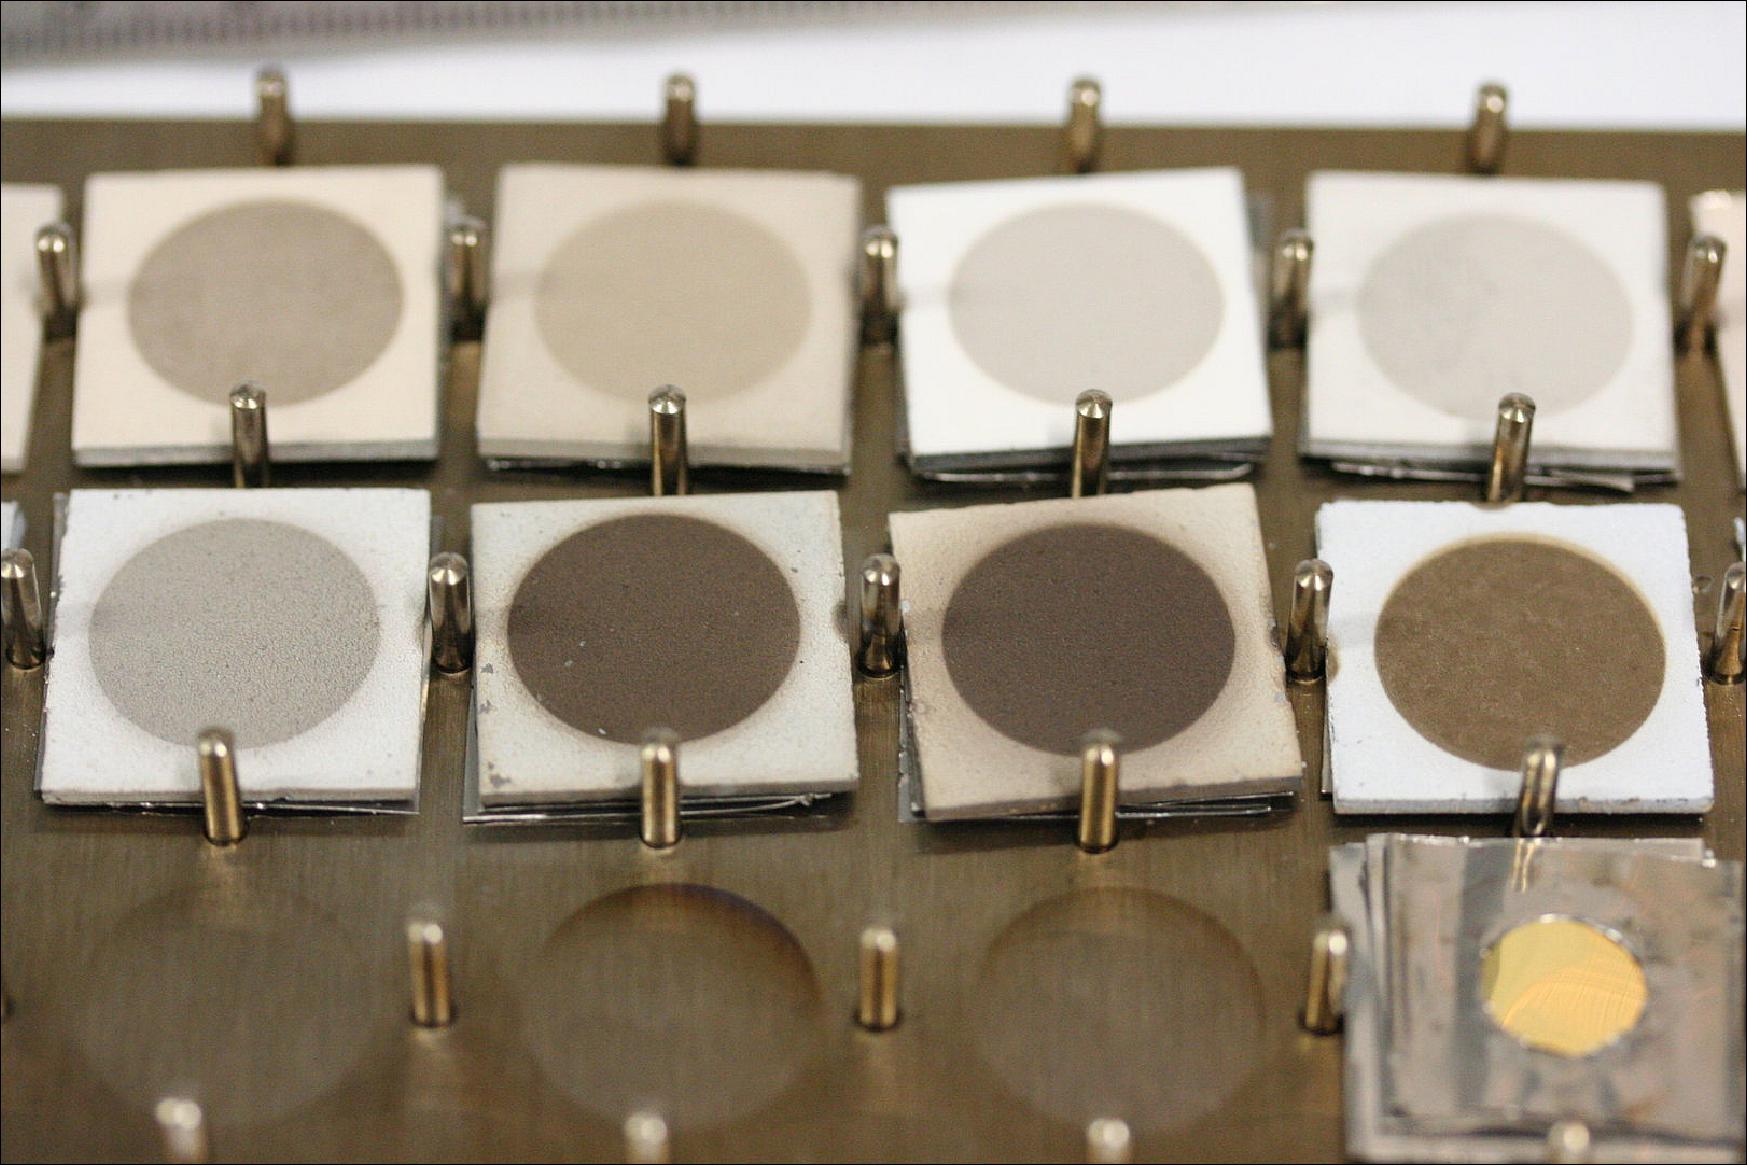 Figure 122: BepiColombo material samples after testing: Sample degradation after BepiColombo lifetime testing for ceramic reflective-surface thermal control materials. Only the central circle of each sample is exposed during testing, the border of each square revealing the original hue. Testing took place at 450ºC with UV radiation equivalent 10 times the sun for 25,000 hours under high vacuum conditions. The smaller the difference between the center and the edge, the more successful the test (image credit: ESA)